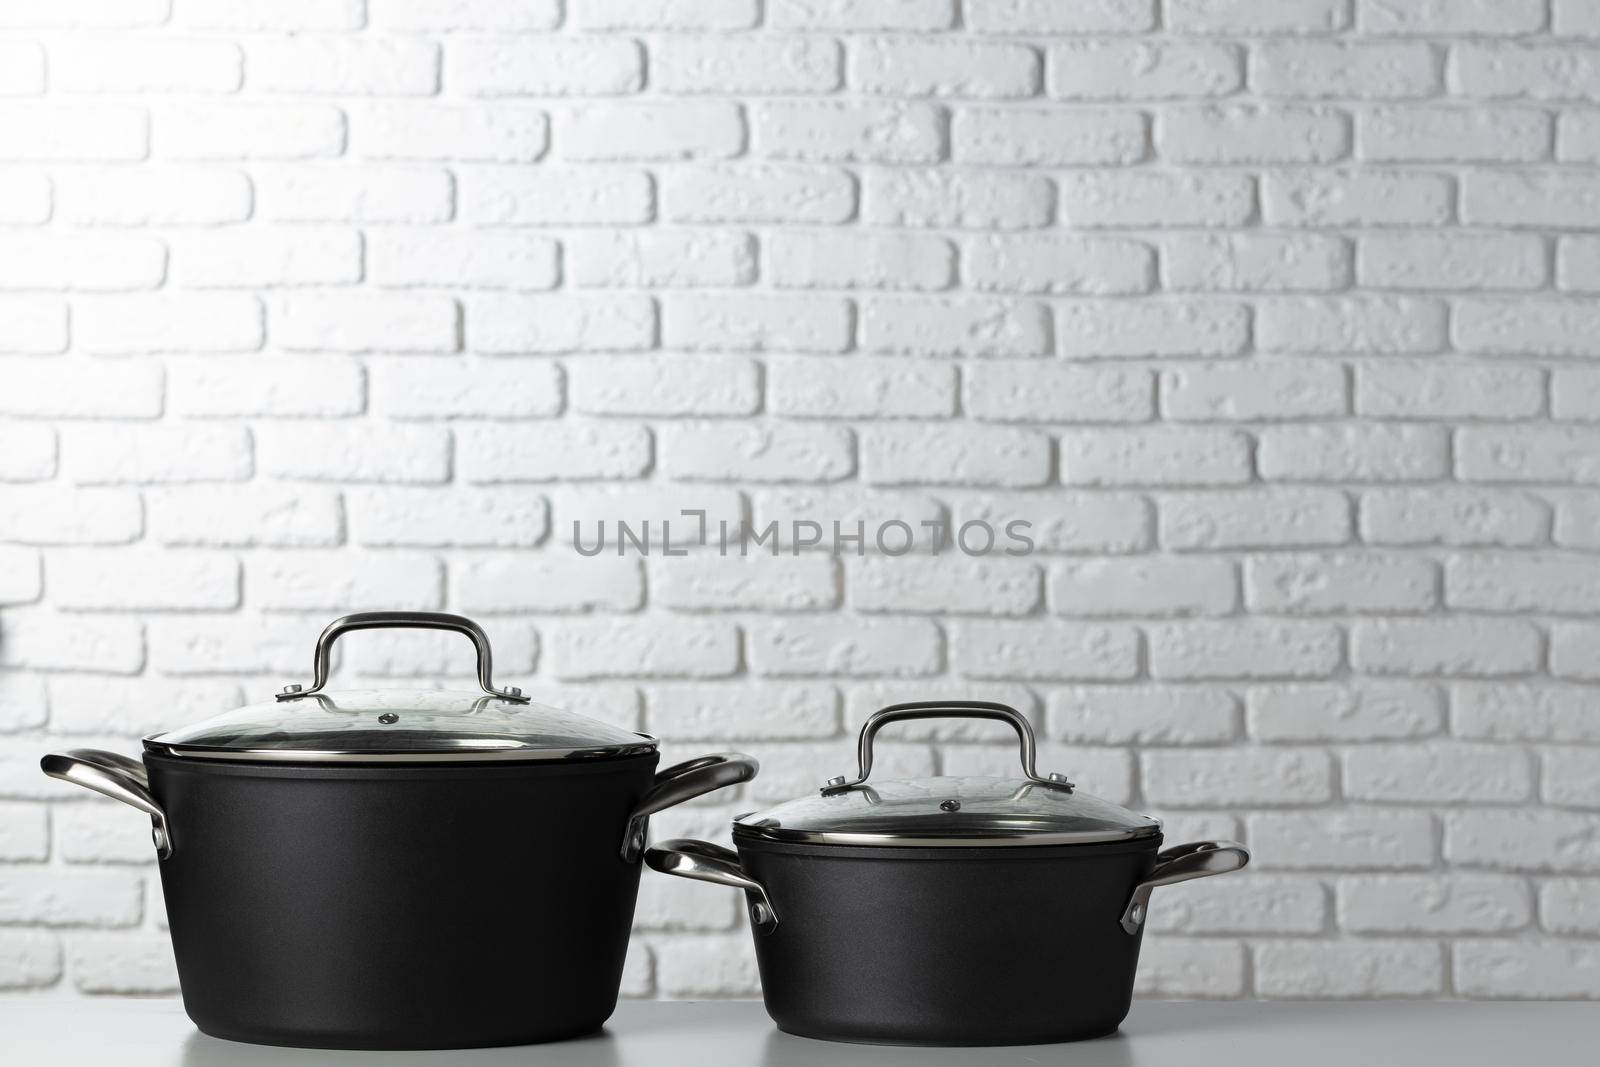 Black kitchenware on table against white brick wall, front view